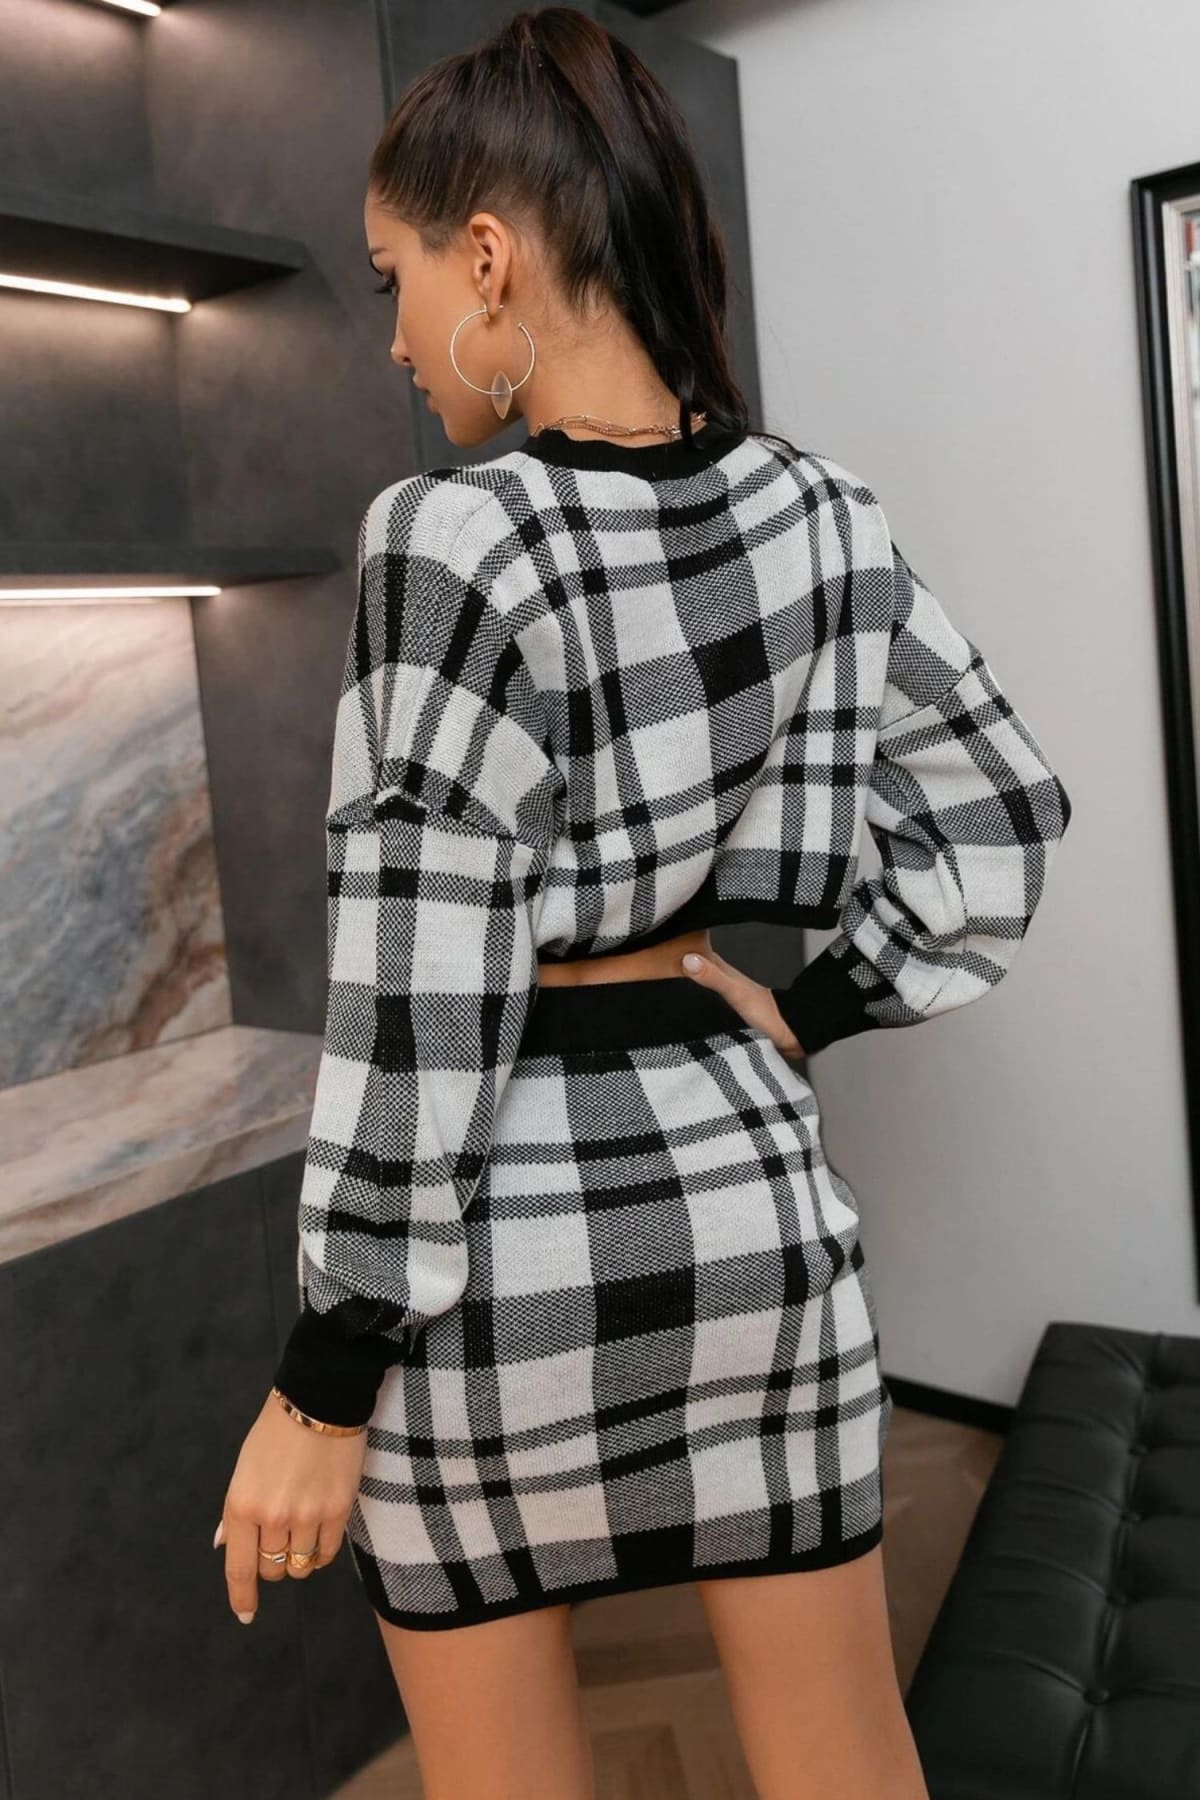 Black And White Plaid Two Piece Sweater Dress Outfit Sets